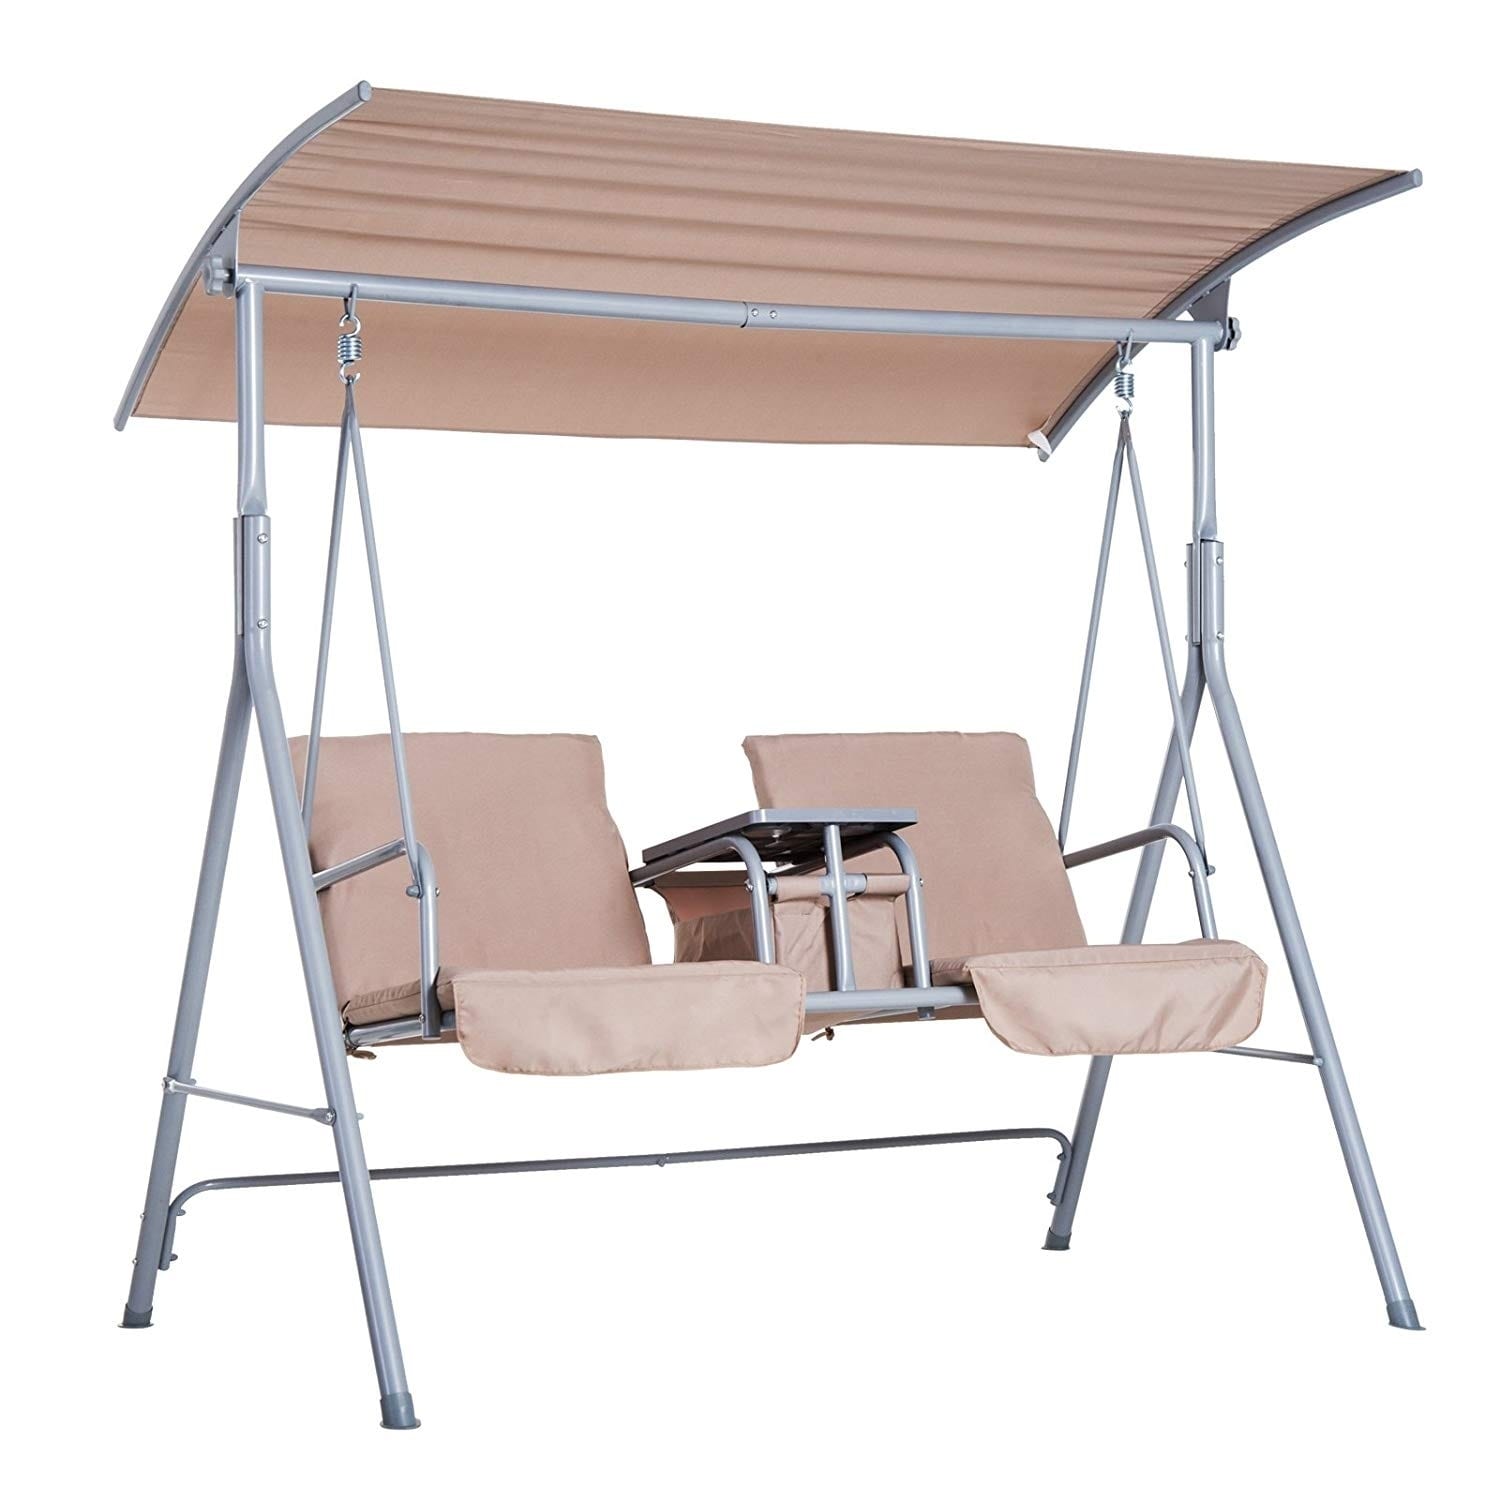 Outsunny  2 Person Water-Resistant Covered Patio Swing with Center Pivot Table and Underneath Storage Console, Beige